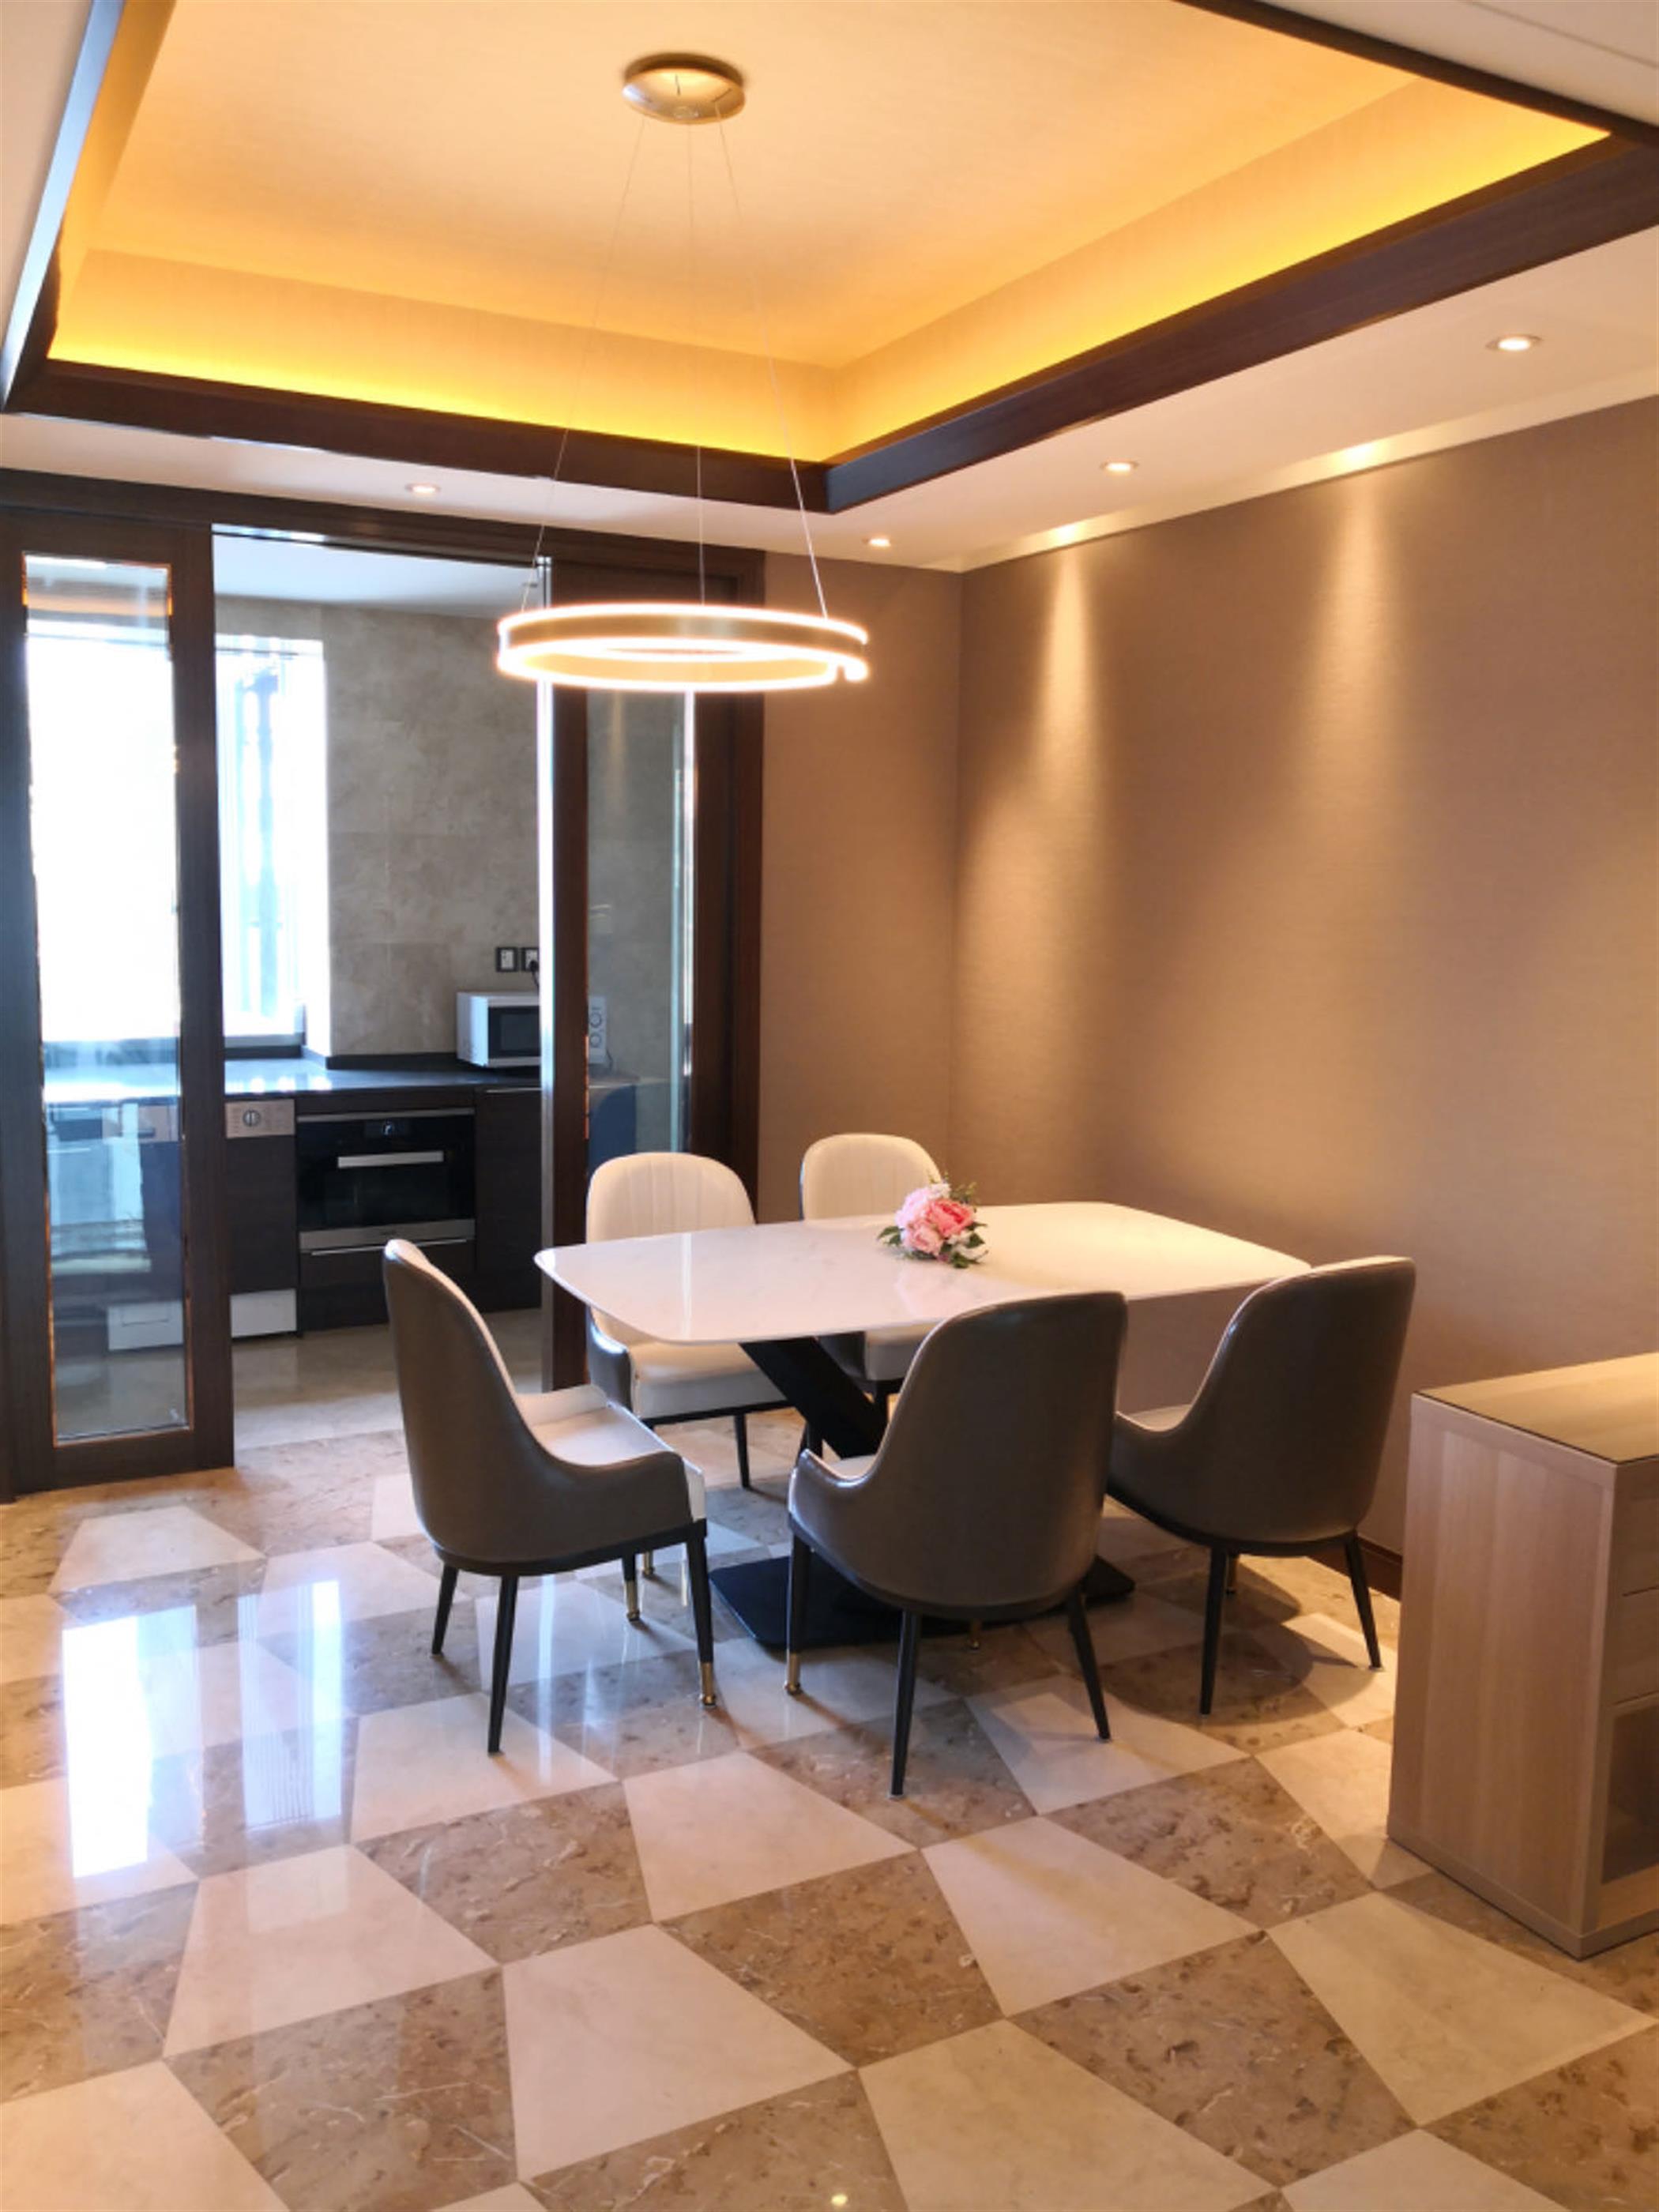 Dining area Deluxe Spacious Classic 3BR Apartment for Rent in Shanghai’s Xintiandi Neighborhood